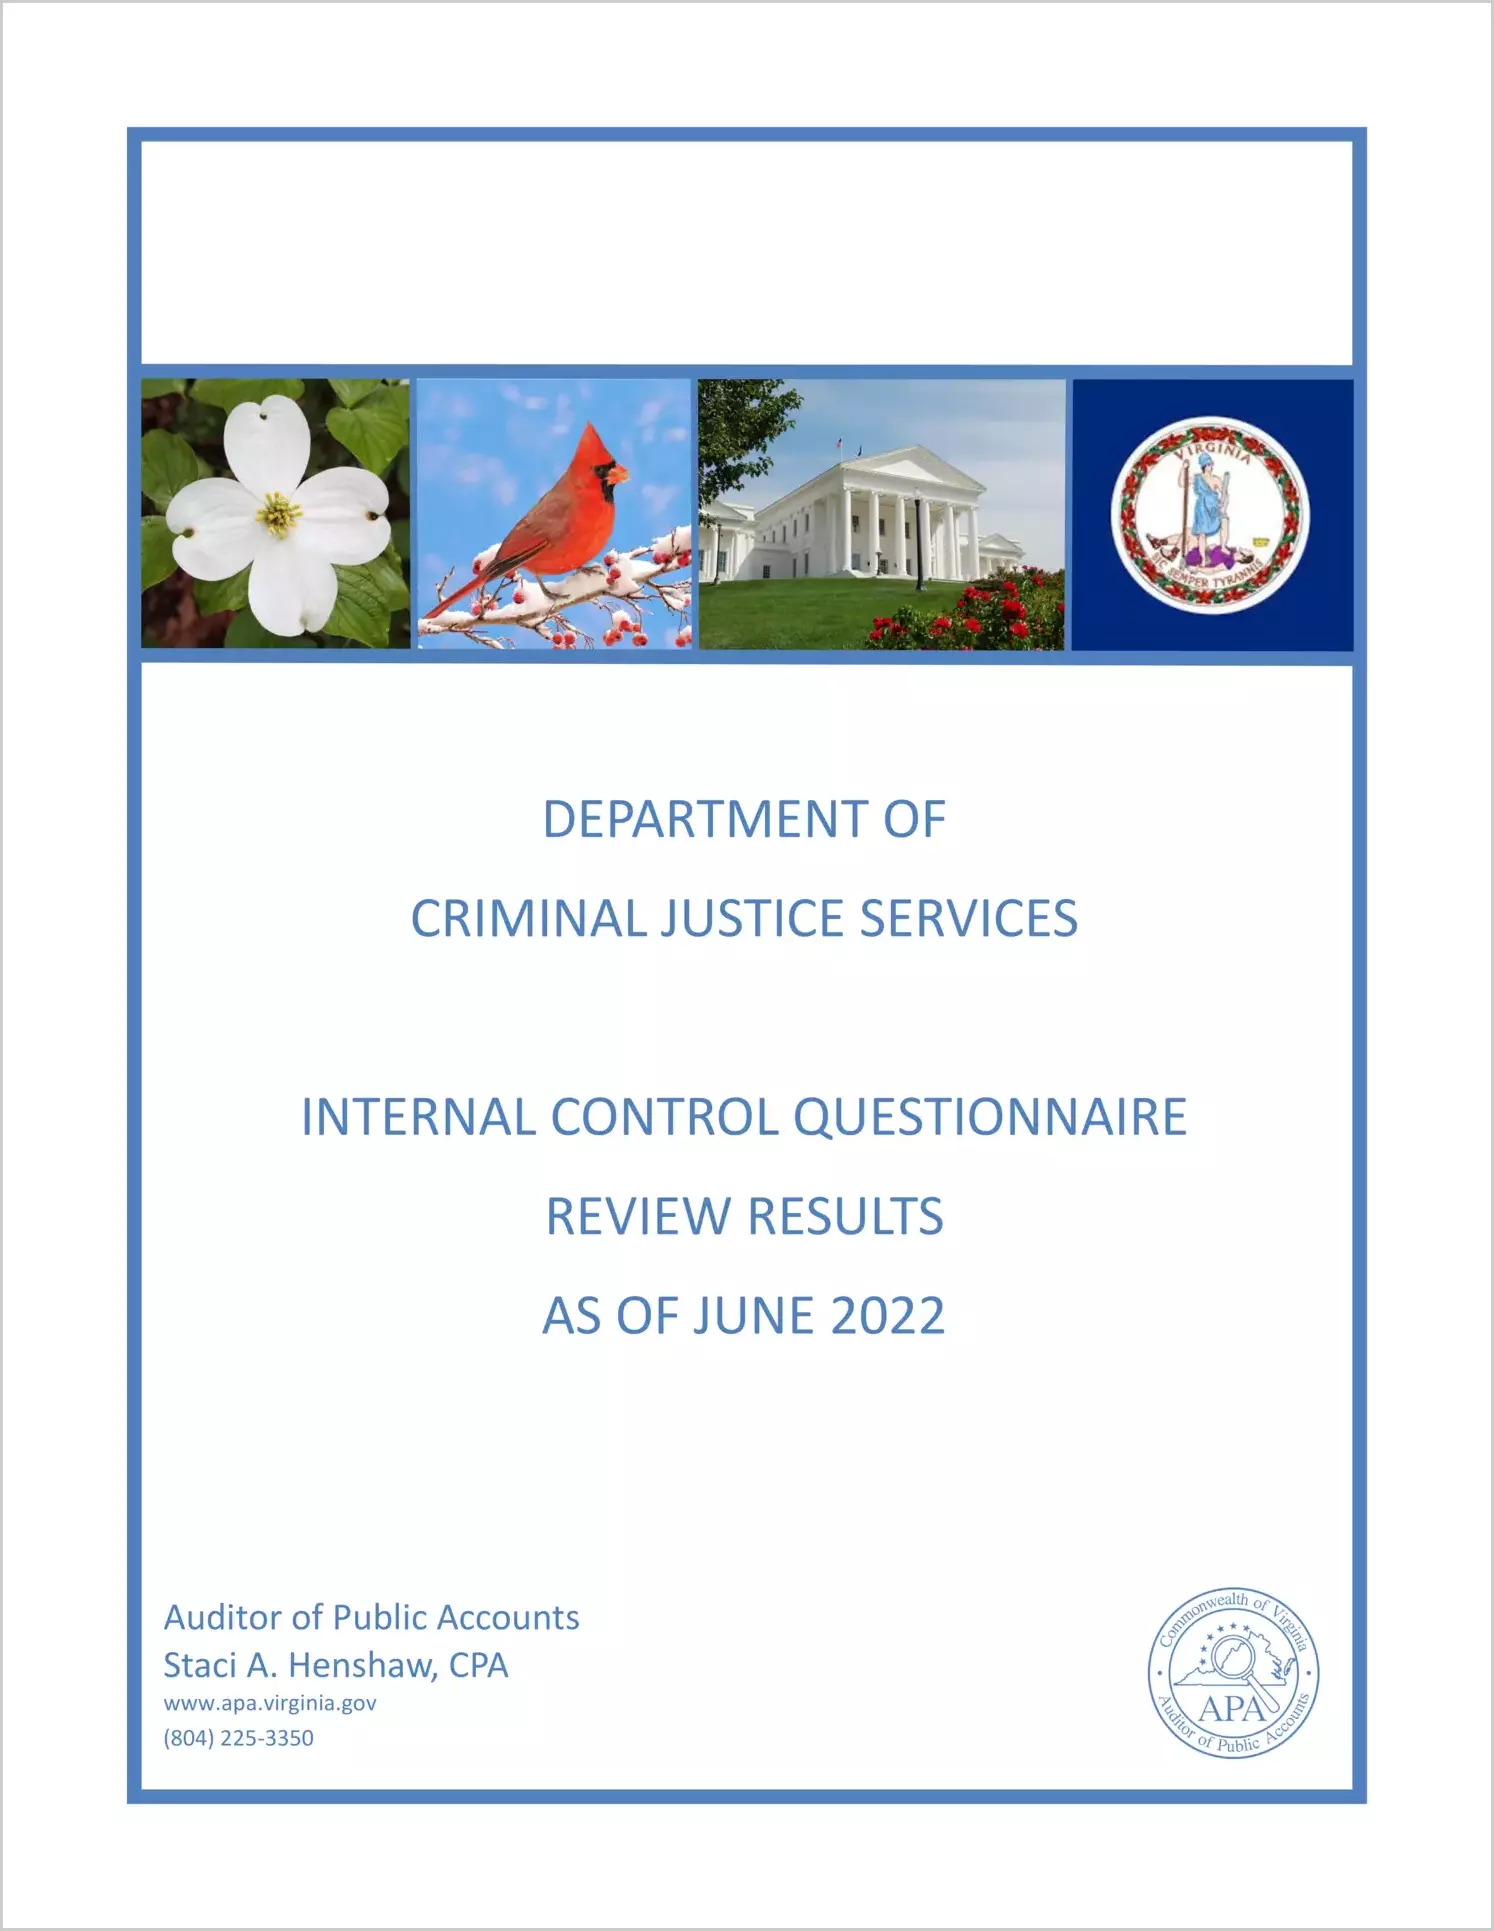 Department of Criminal Justice Services Internal Control Questionnaire Review Results as of June 2022